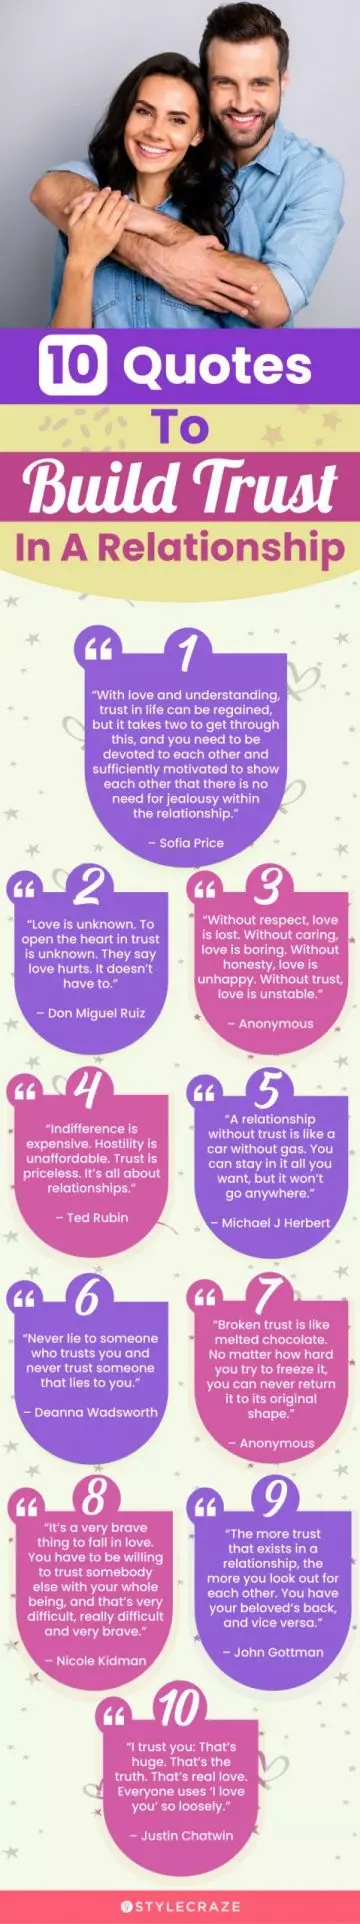 10 quotes to build trust in a relationship (infographic)